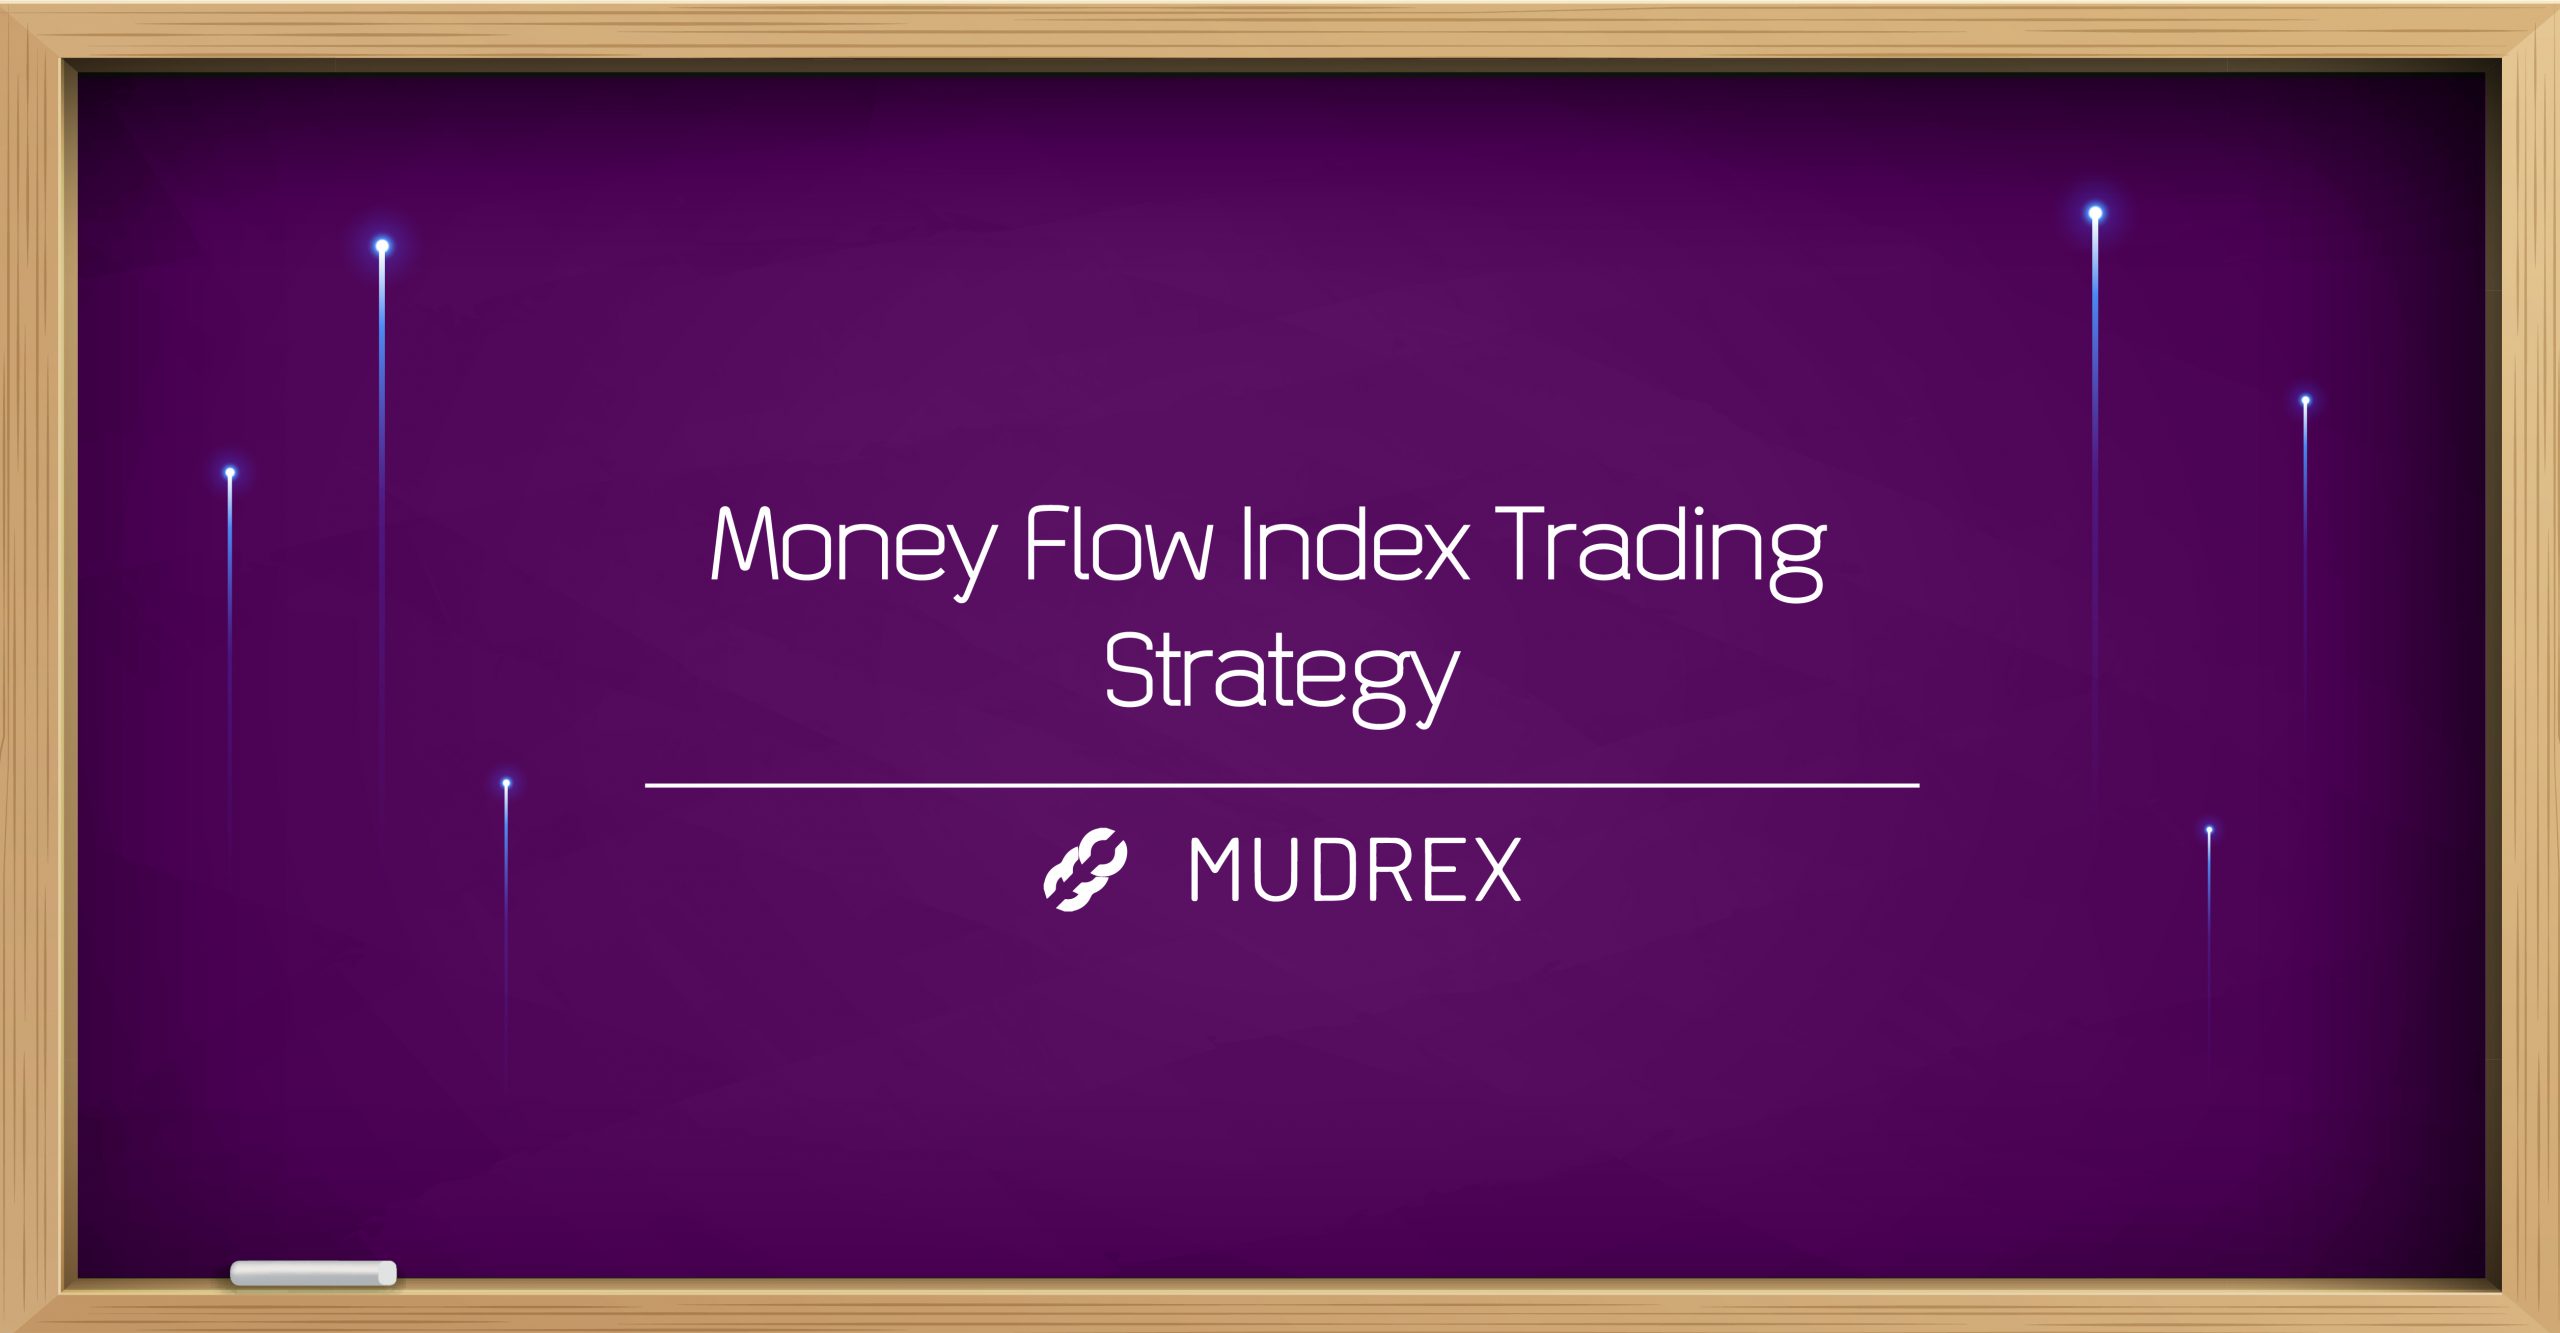 Money Flow Index Trading Strategy